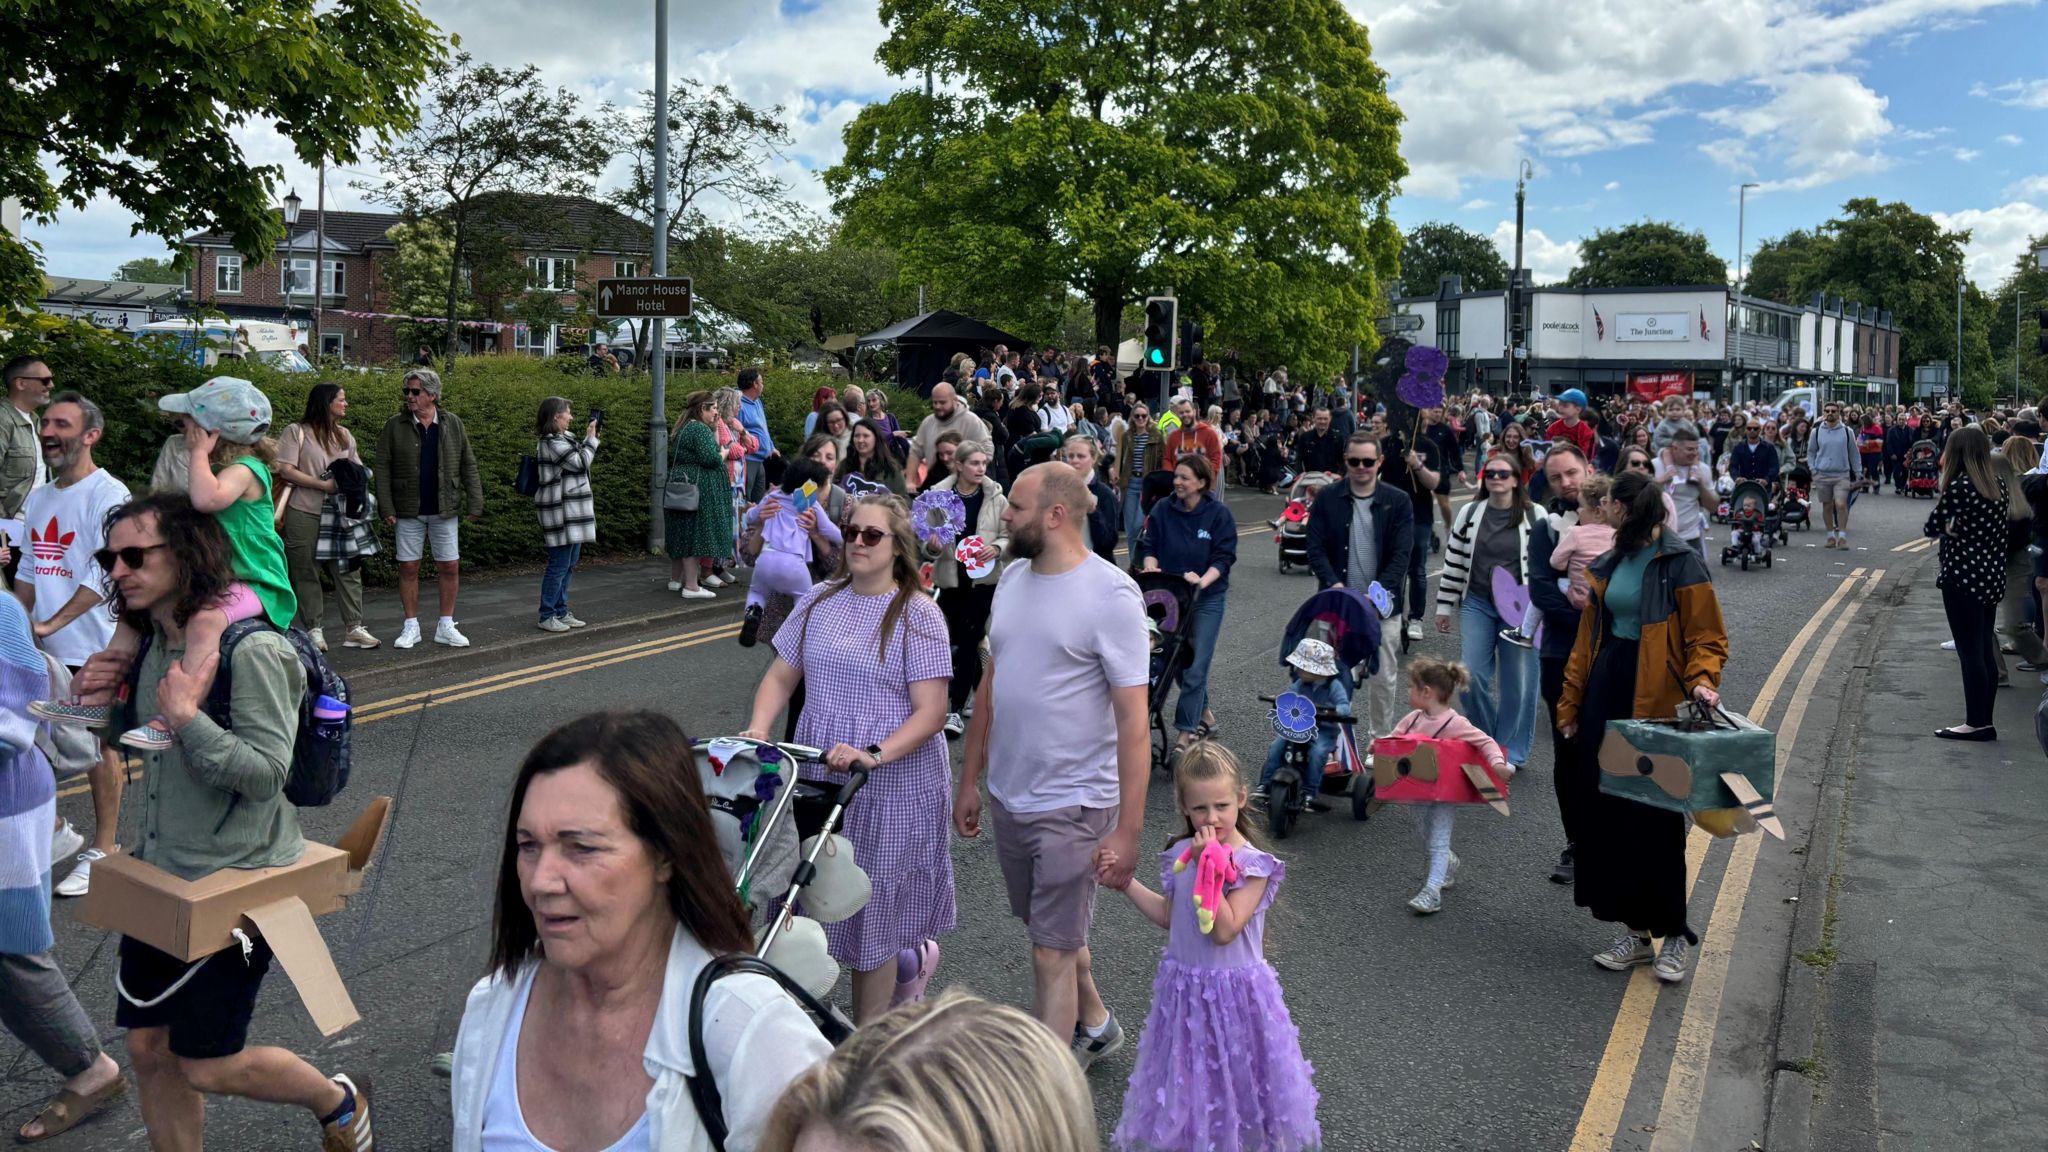 The Alsager Carnival parade